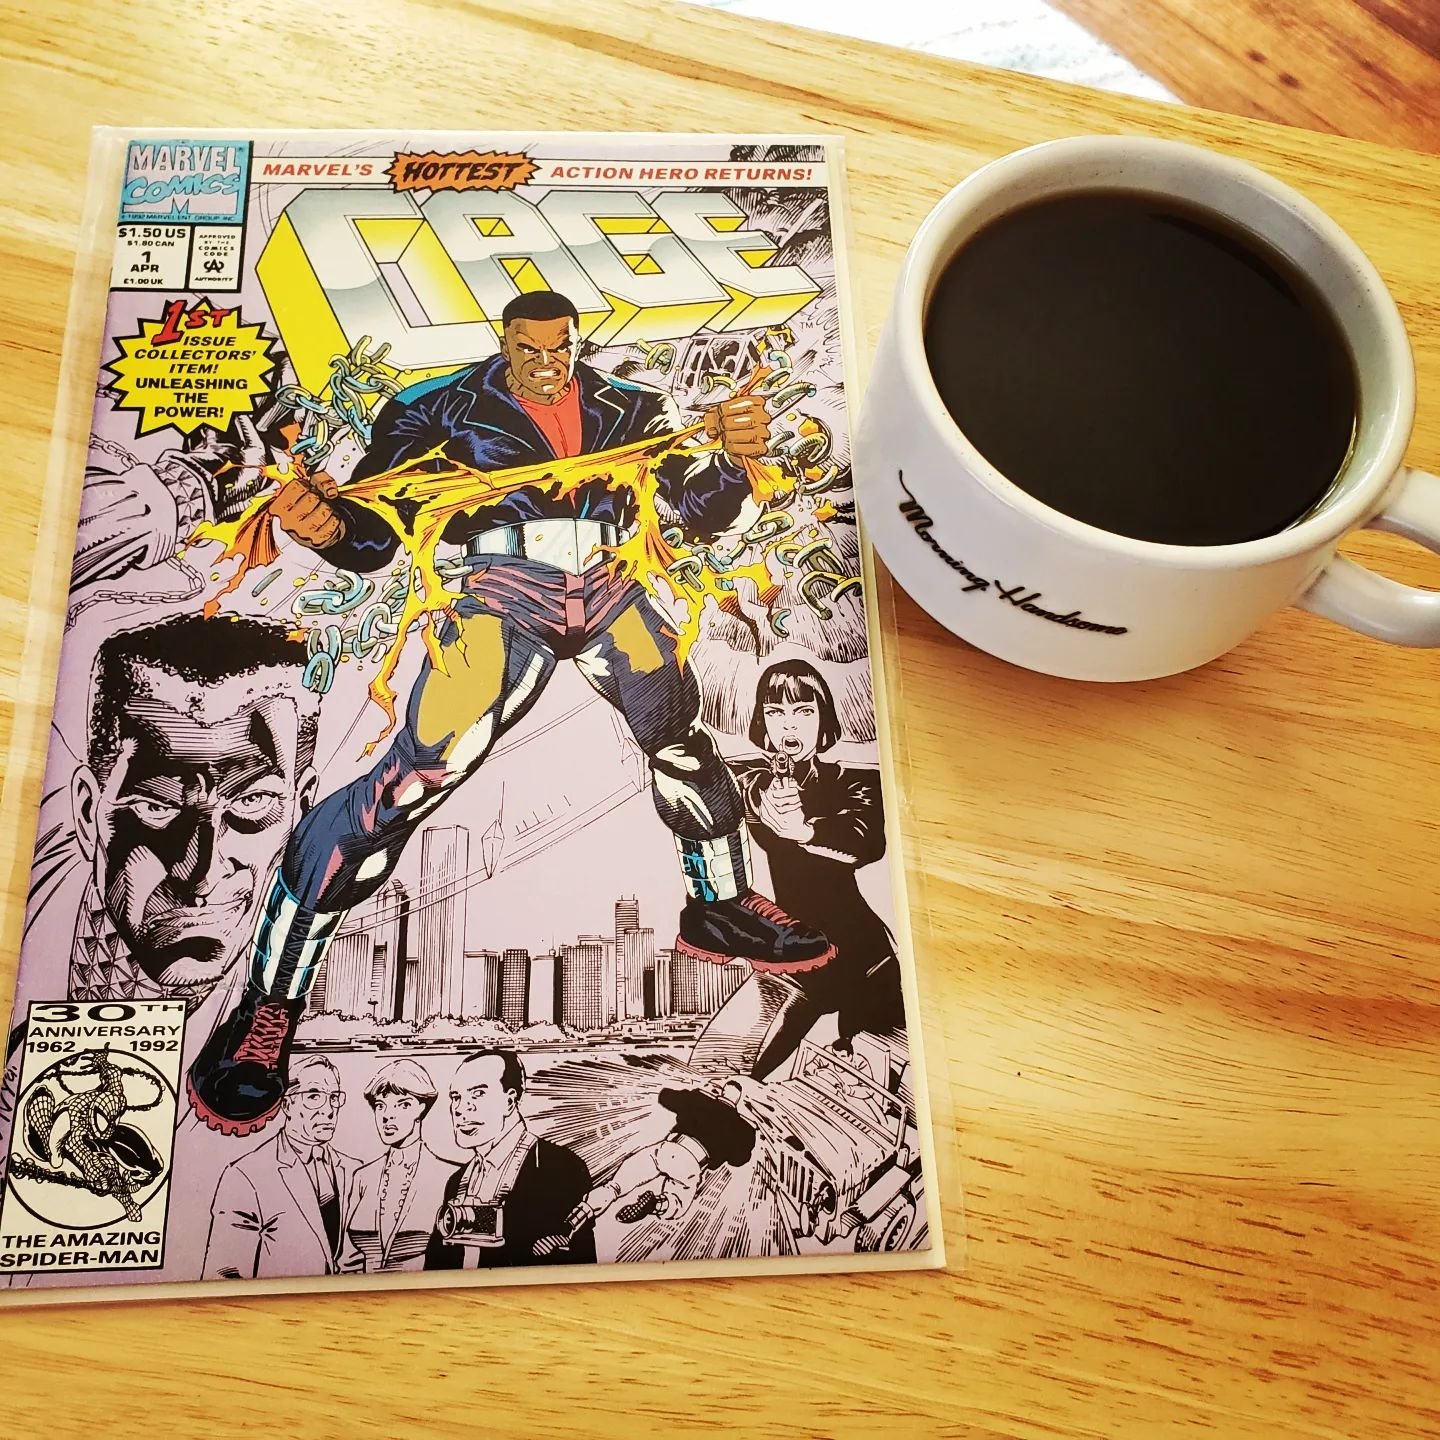 Today's coffee ☕ and a comic 📓 is In CAGE 1 from 1992, penned by Marc McLaurin with art by Dwayne Turner and Chris Ivy, Luke Cage lands a gig as a superhero for hire at a Chicago paper. Tasked with taking down criminals for cash, Cage faces Hardcore